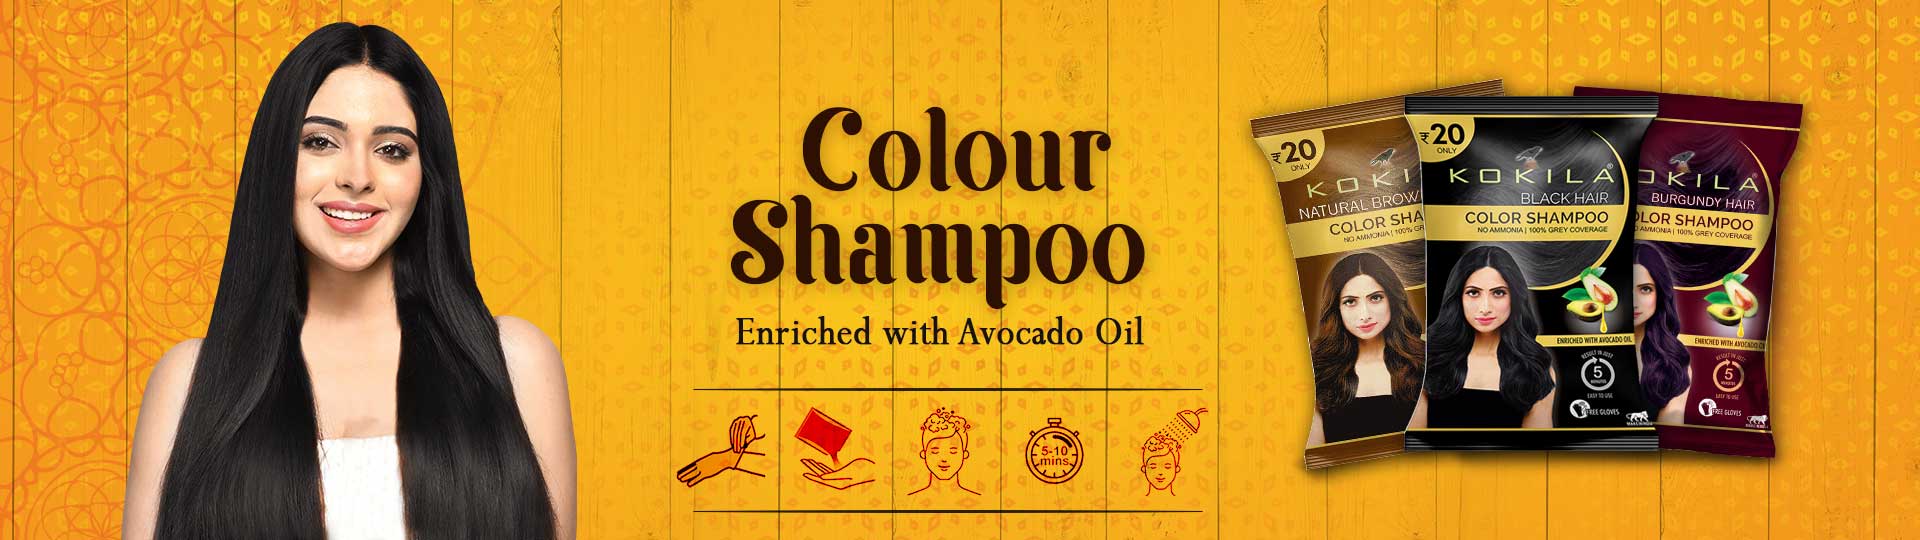 Best Hair Color Shampoo Manufacturer, Supplier, Exporter, Importer From  India